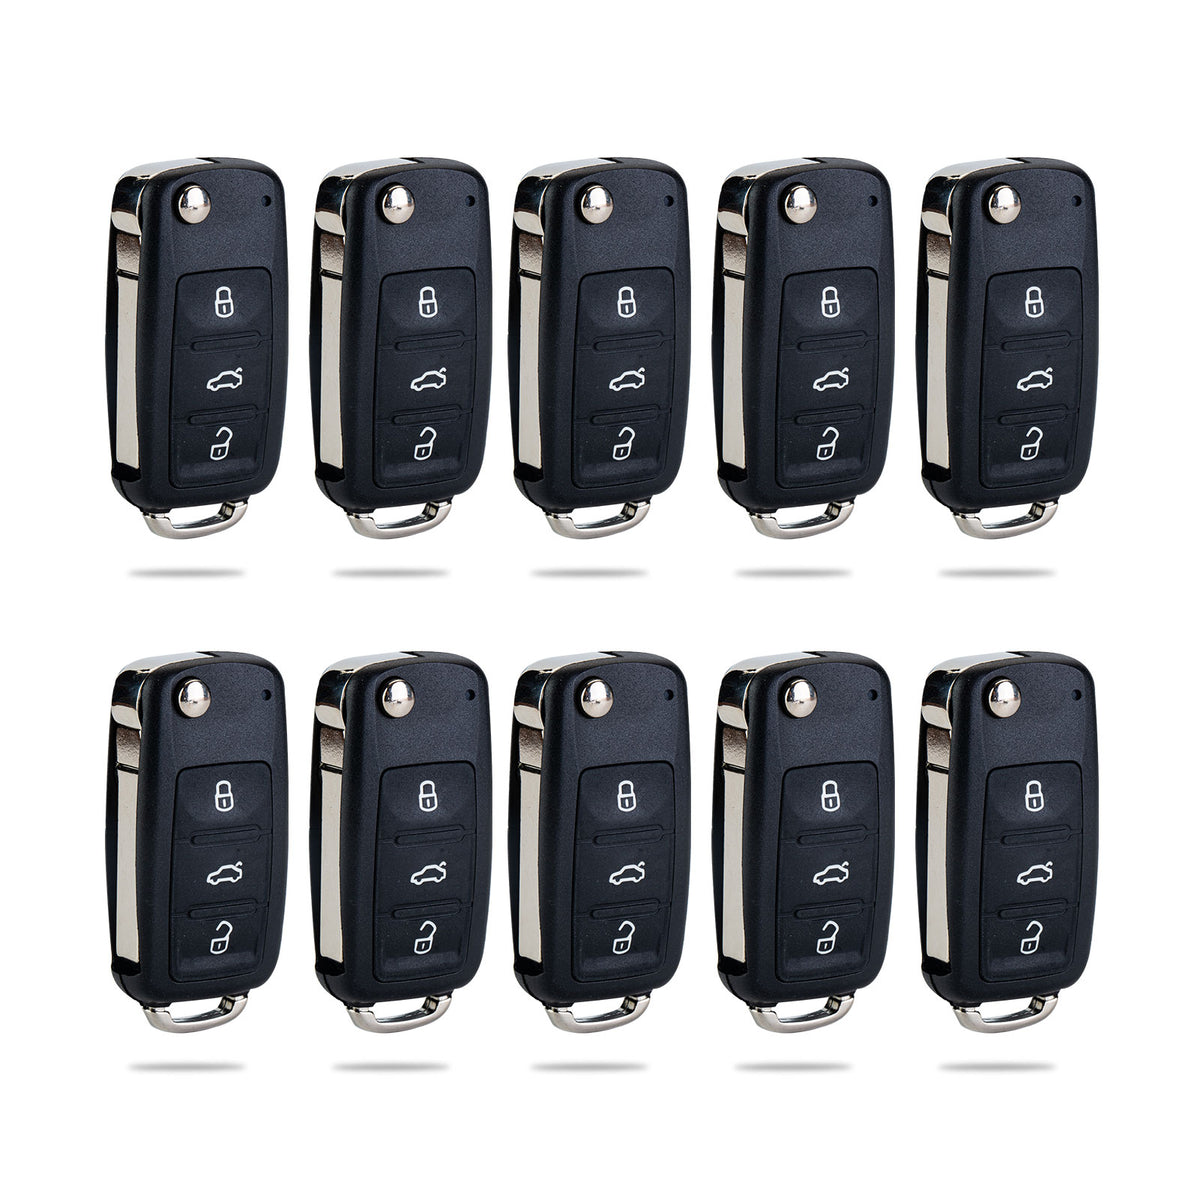 Lots of 10 Remote Car Key Fob Replacement for VW NBG010180T fits 2012 2013 2014 2015 2016 Golf Jetta Passat Beetle